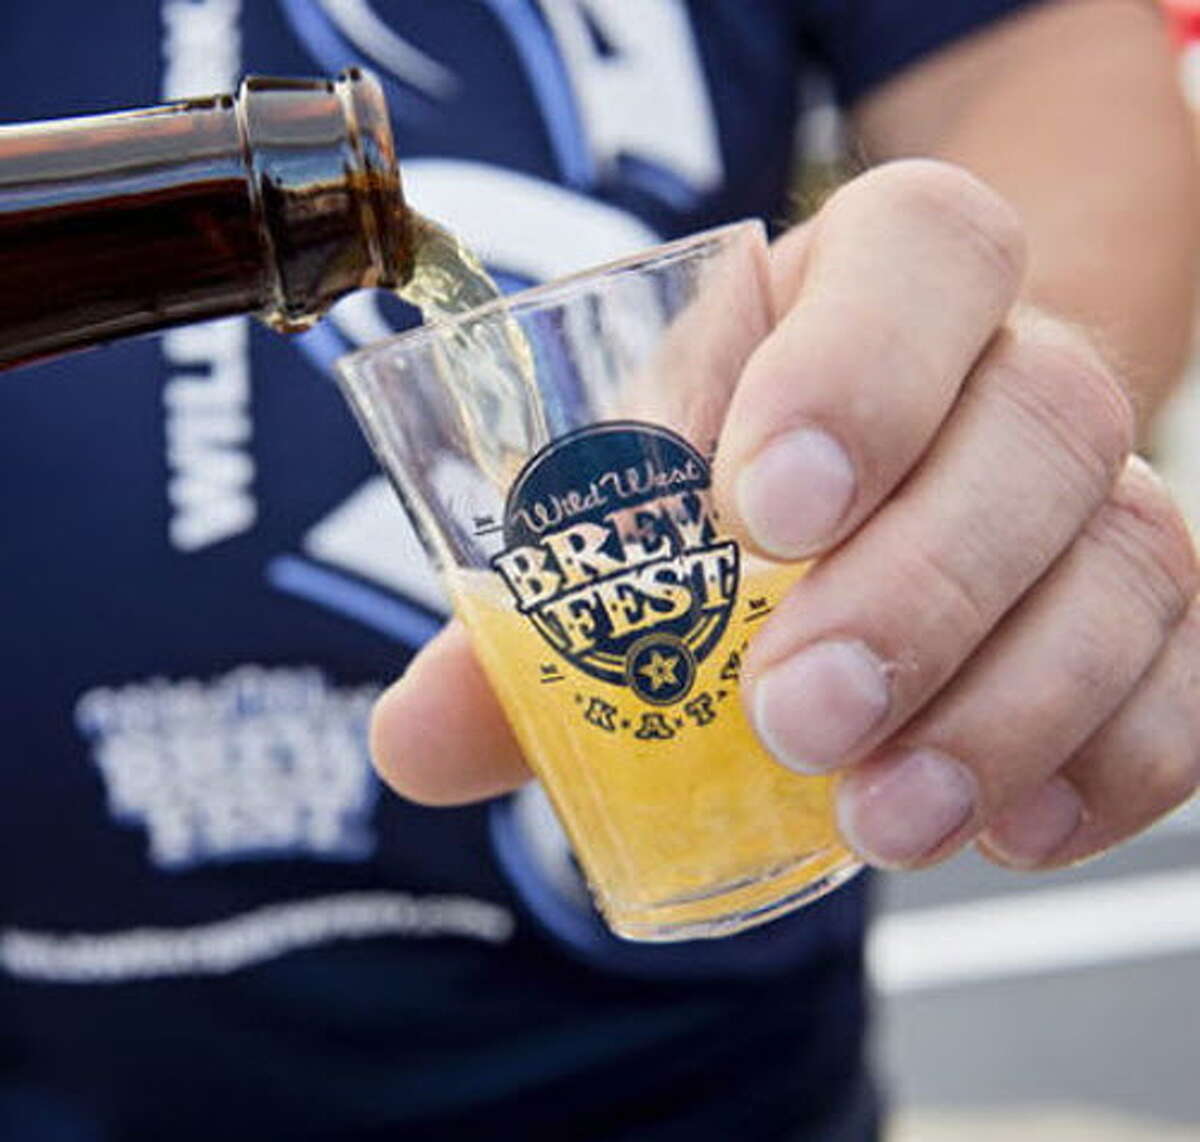 The Wild West Brew Fest has been ranked the best beer festival in the U.S. by beeryeti.com. Continue clicking to see photos from past festivals.